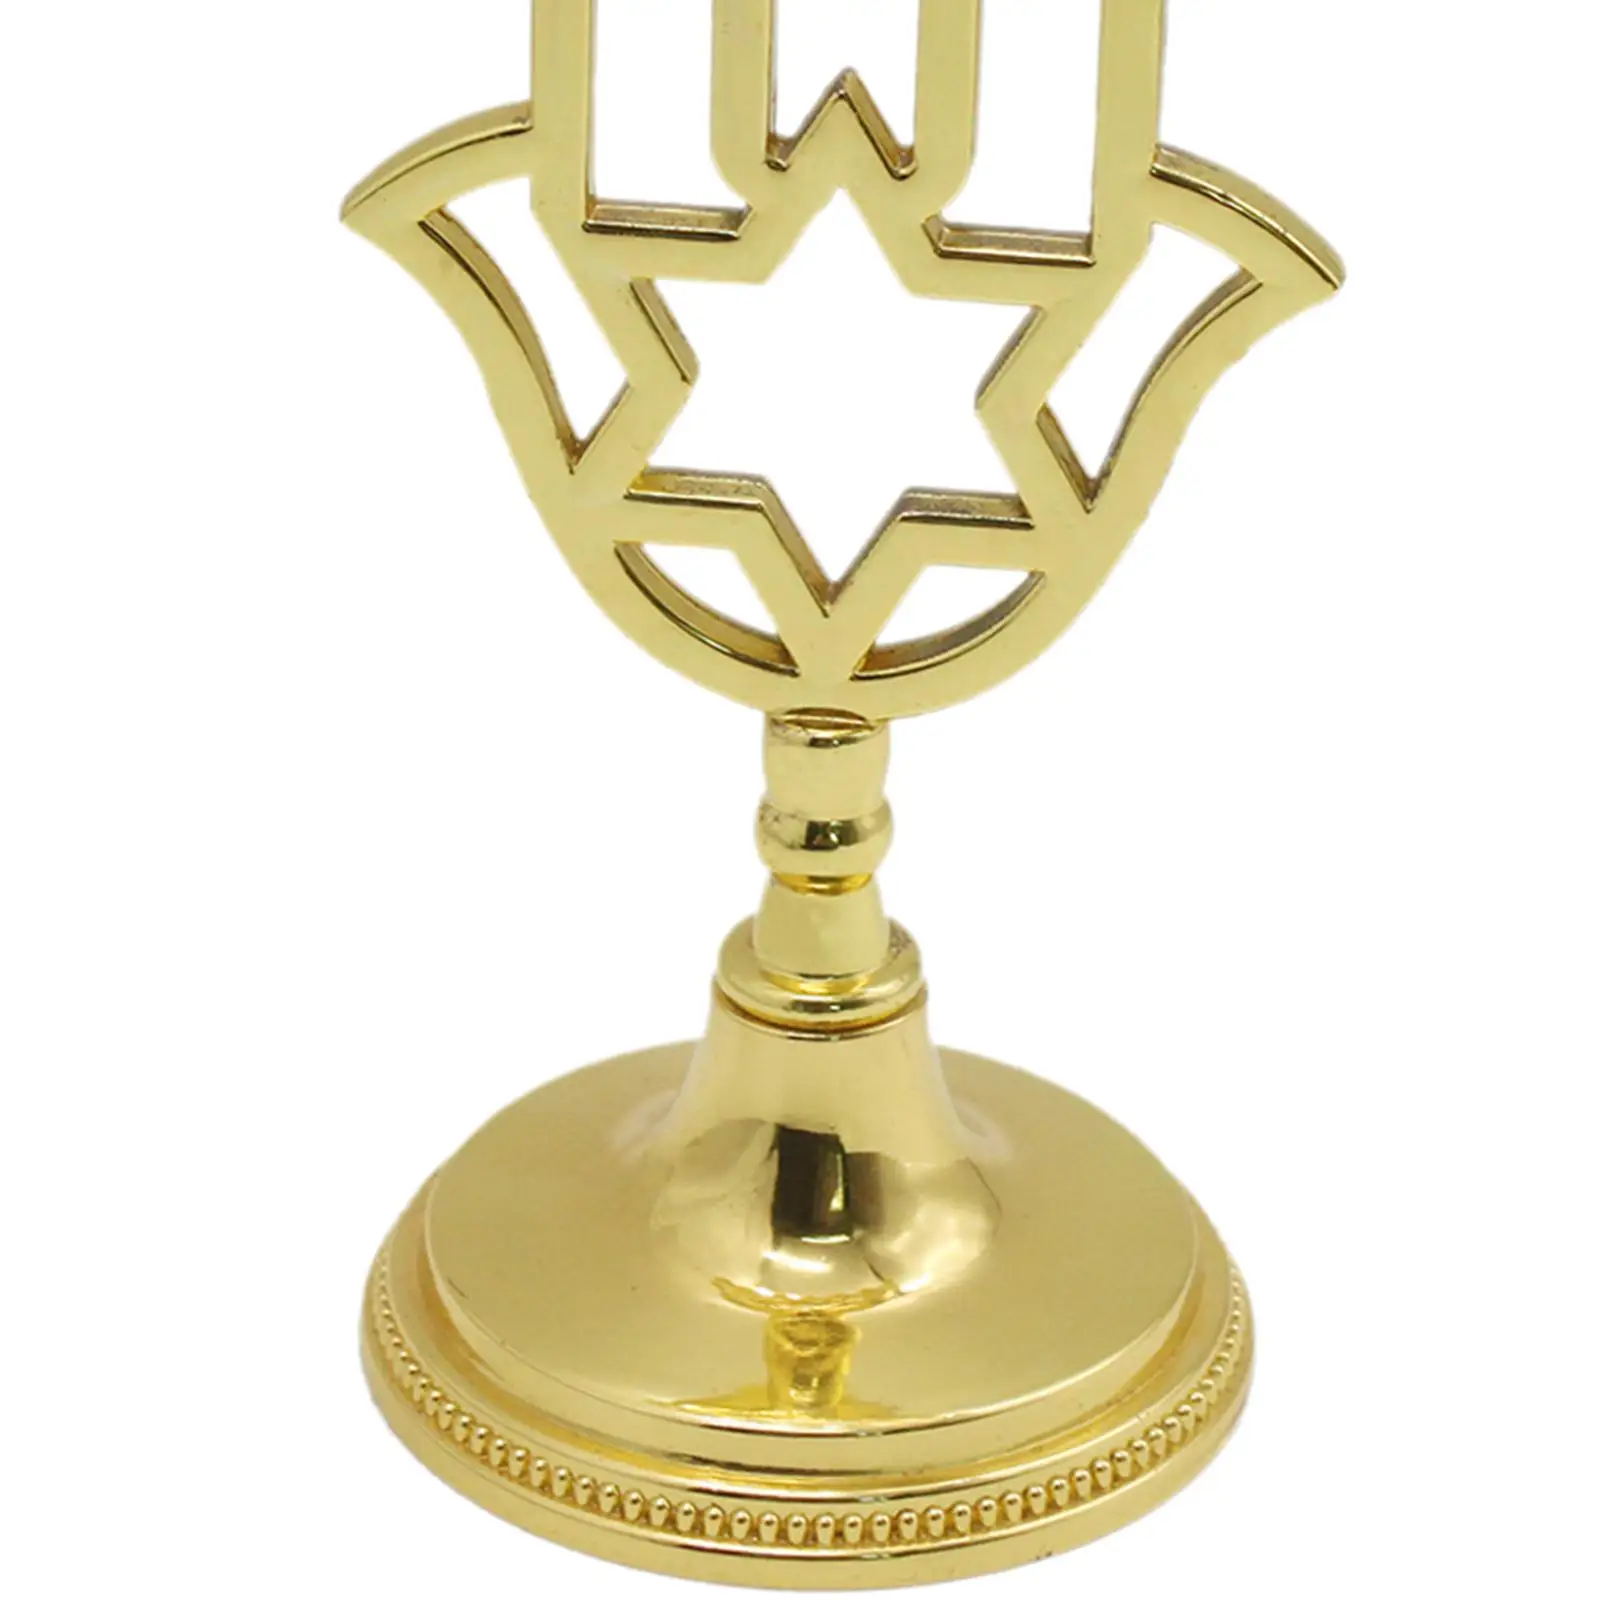 Hanukkah Chanukah Menorah Ornament 7 Branches Candle Holder Candle Stand for New Year Event Anniversary Festival Decoration